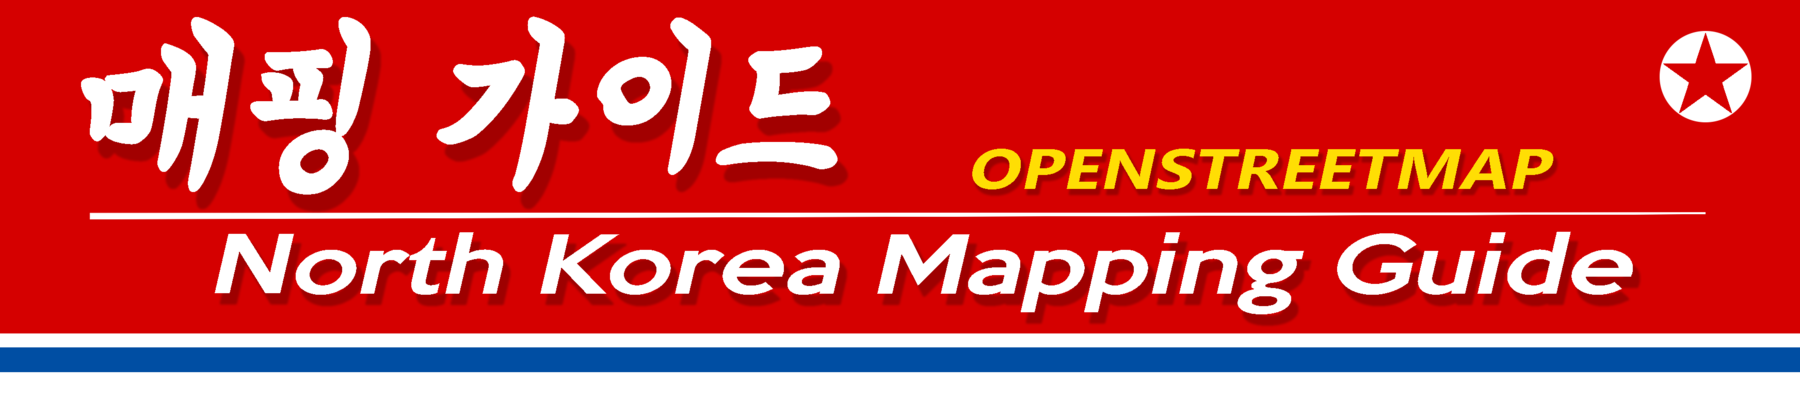 North Korea Mapping Guide - Banner 04.png